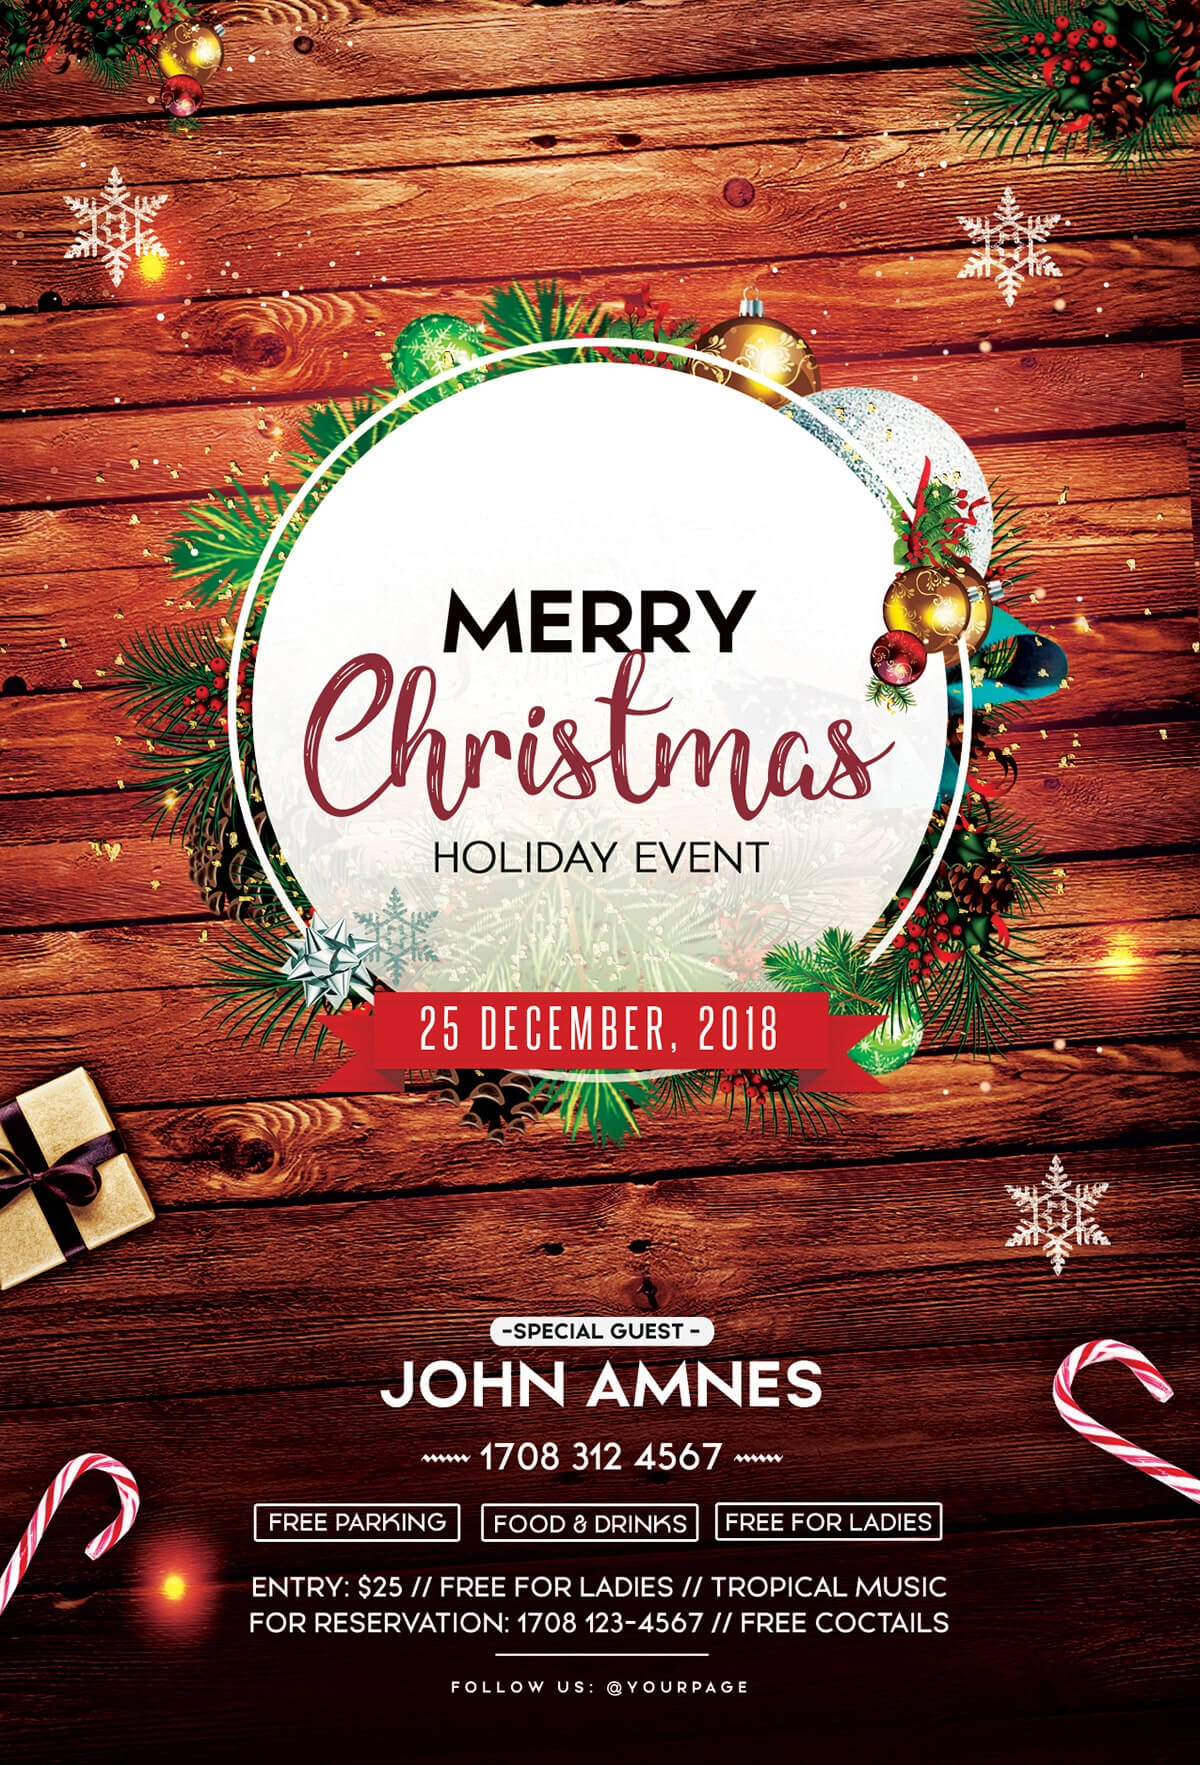 Merry Christmas 2018 – Free Psd Flyer Template – Free Psd In Christmas Brochure Templates Free